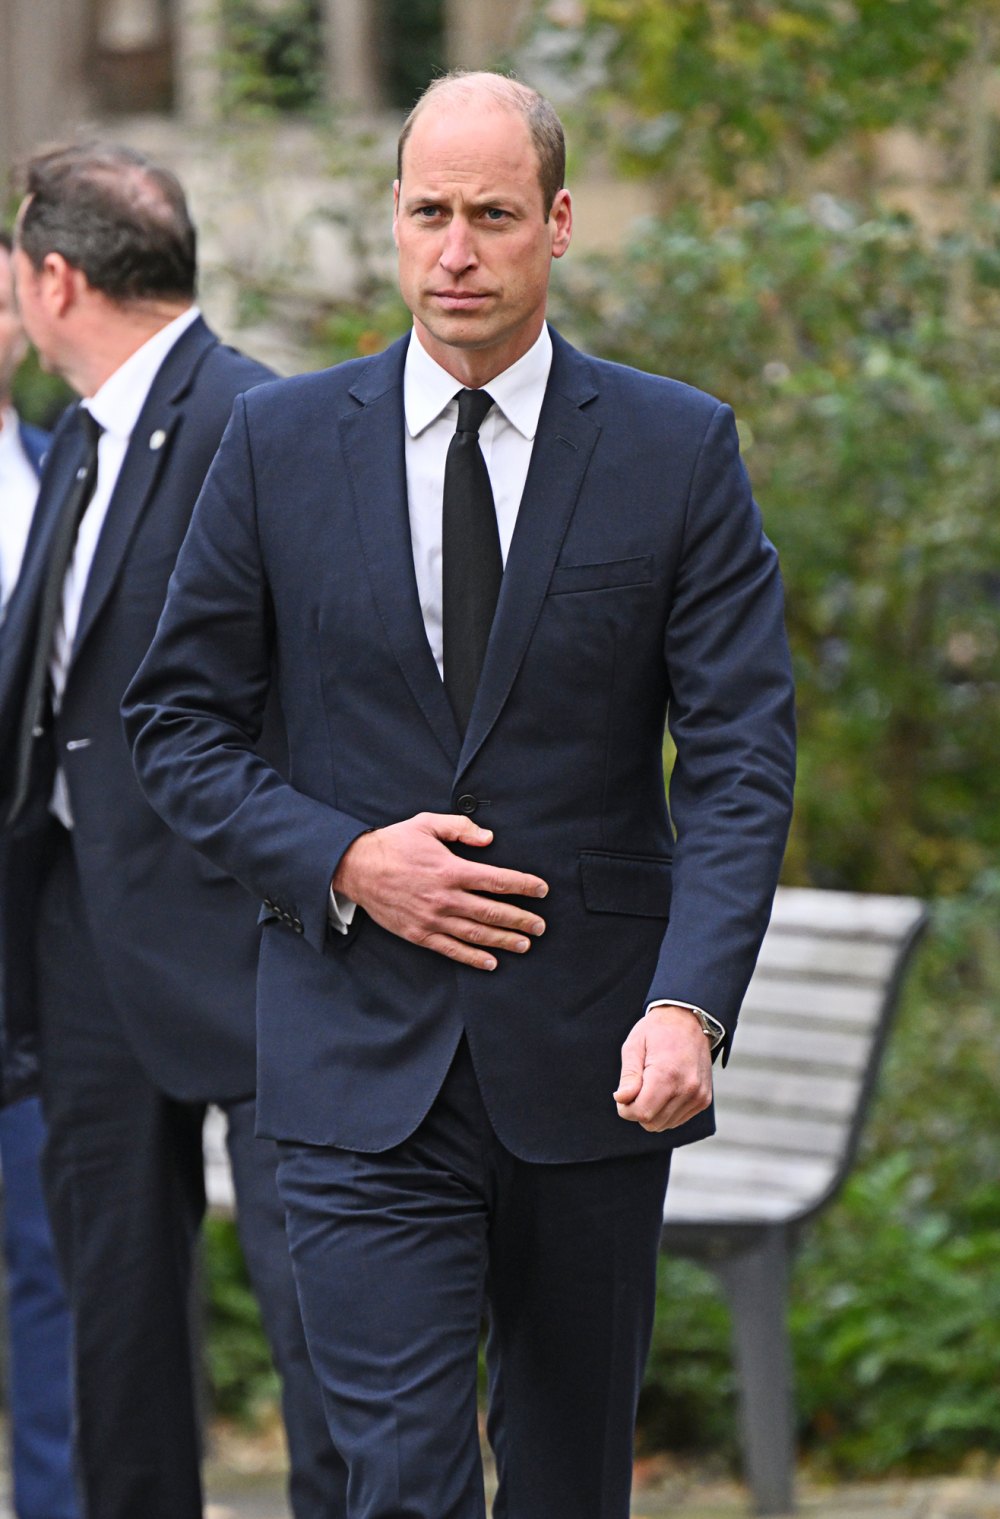 Prince William Attends Thomas Kingston Funeral Without Kate Middleton